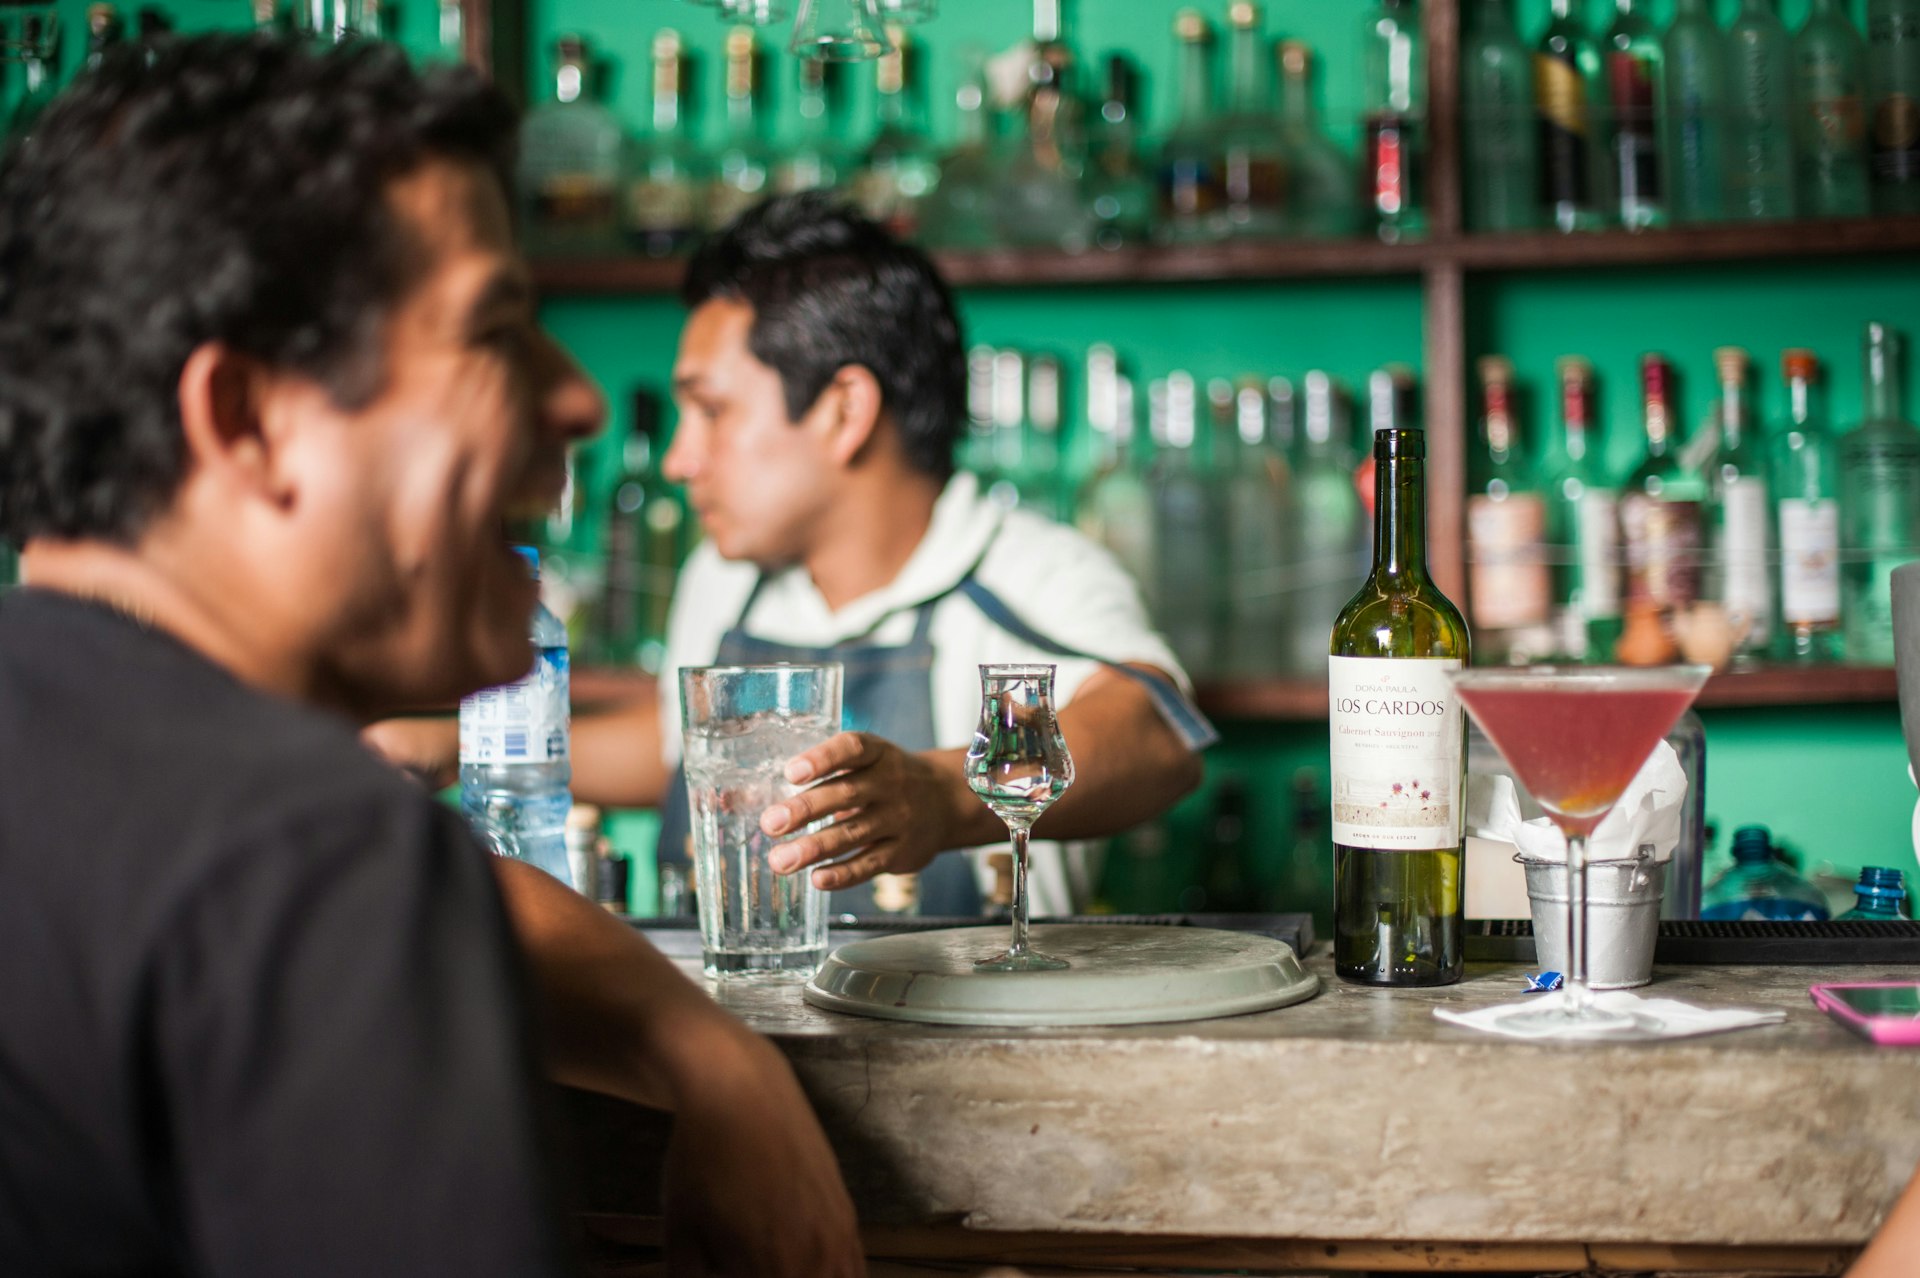 People drinking cocktails, being served by the bartender. Liquor bottles and glasses are displayed in the background.